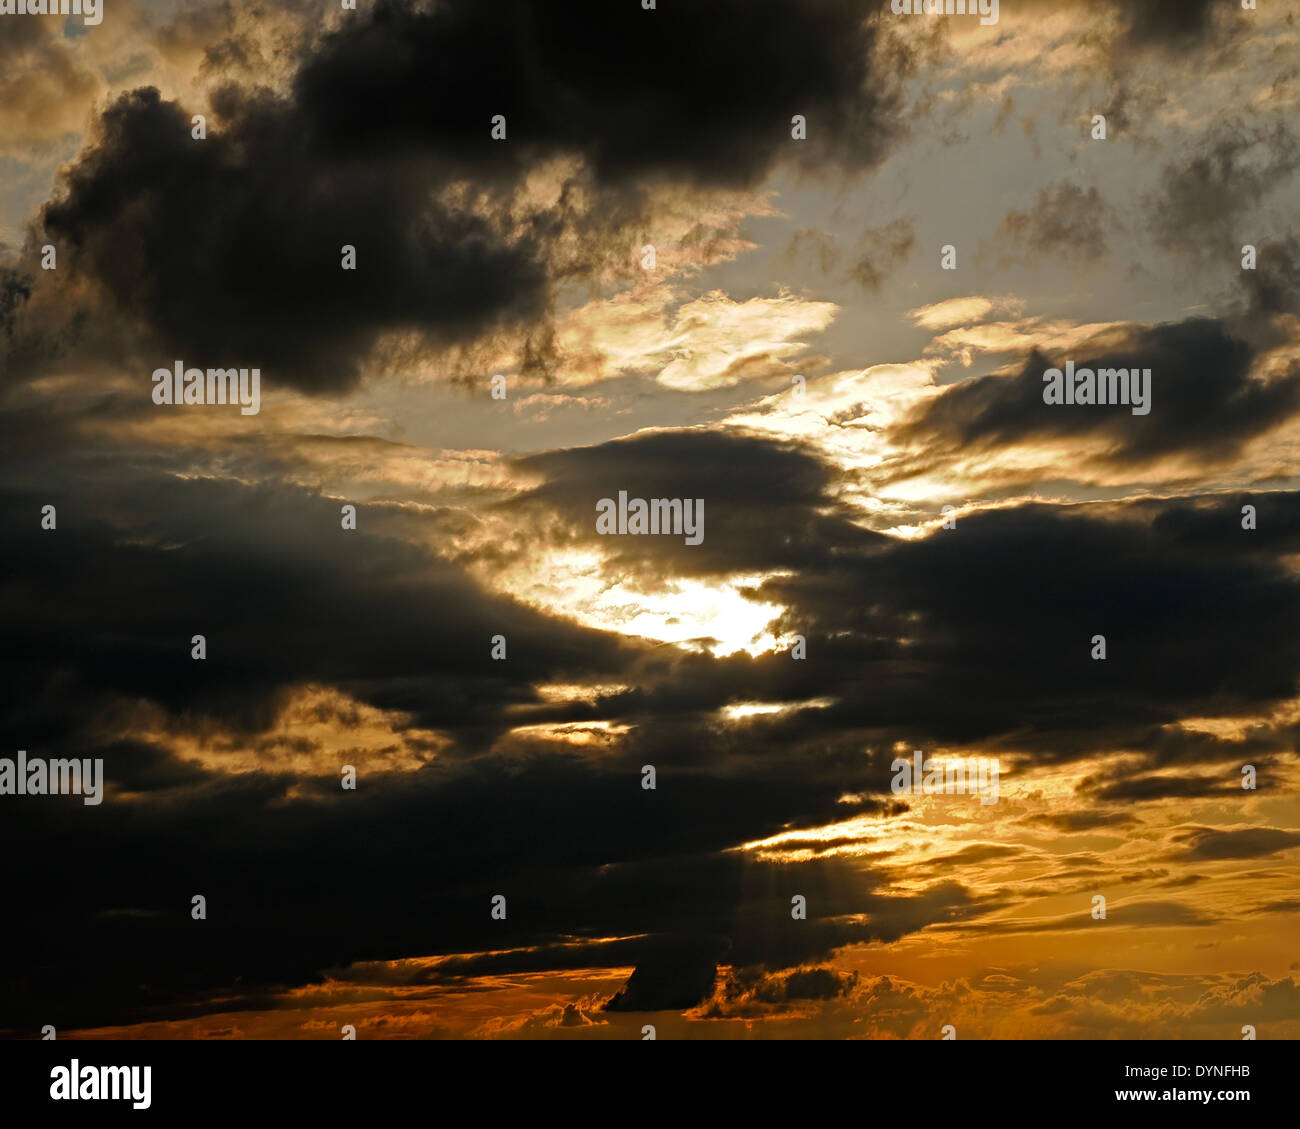 Dramatic Cloud Filled Sky. Stock Photo